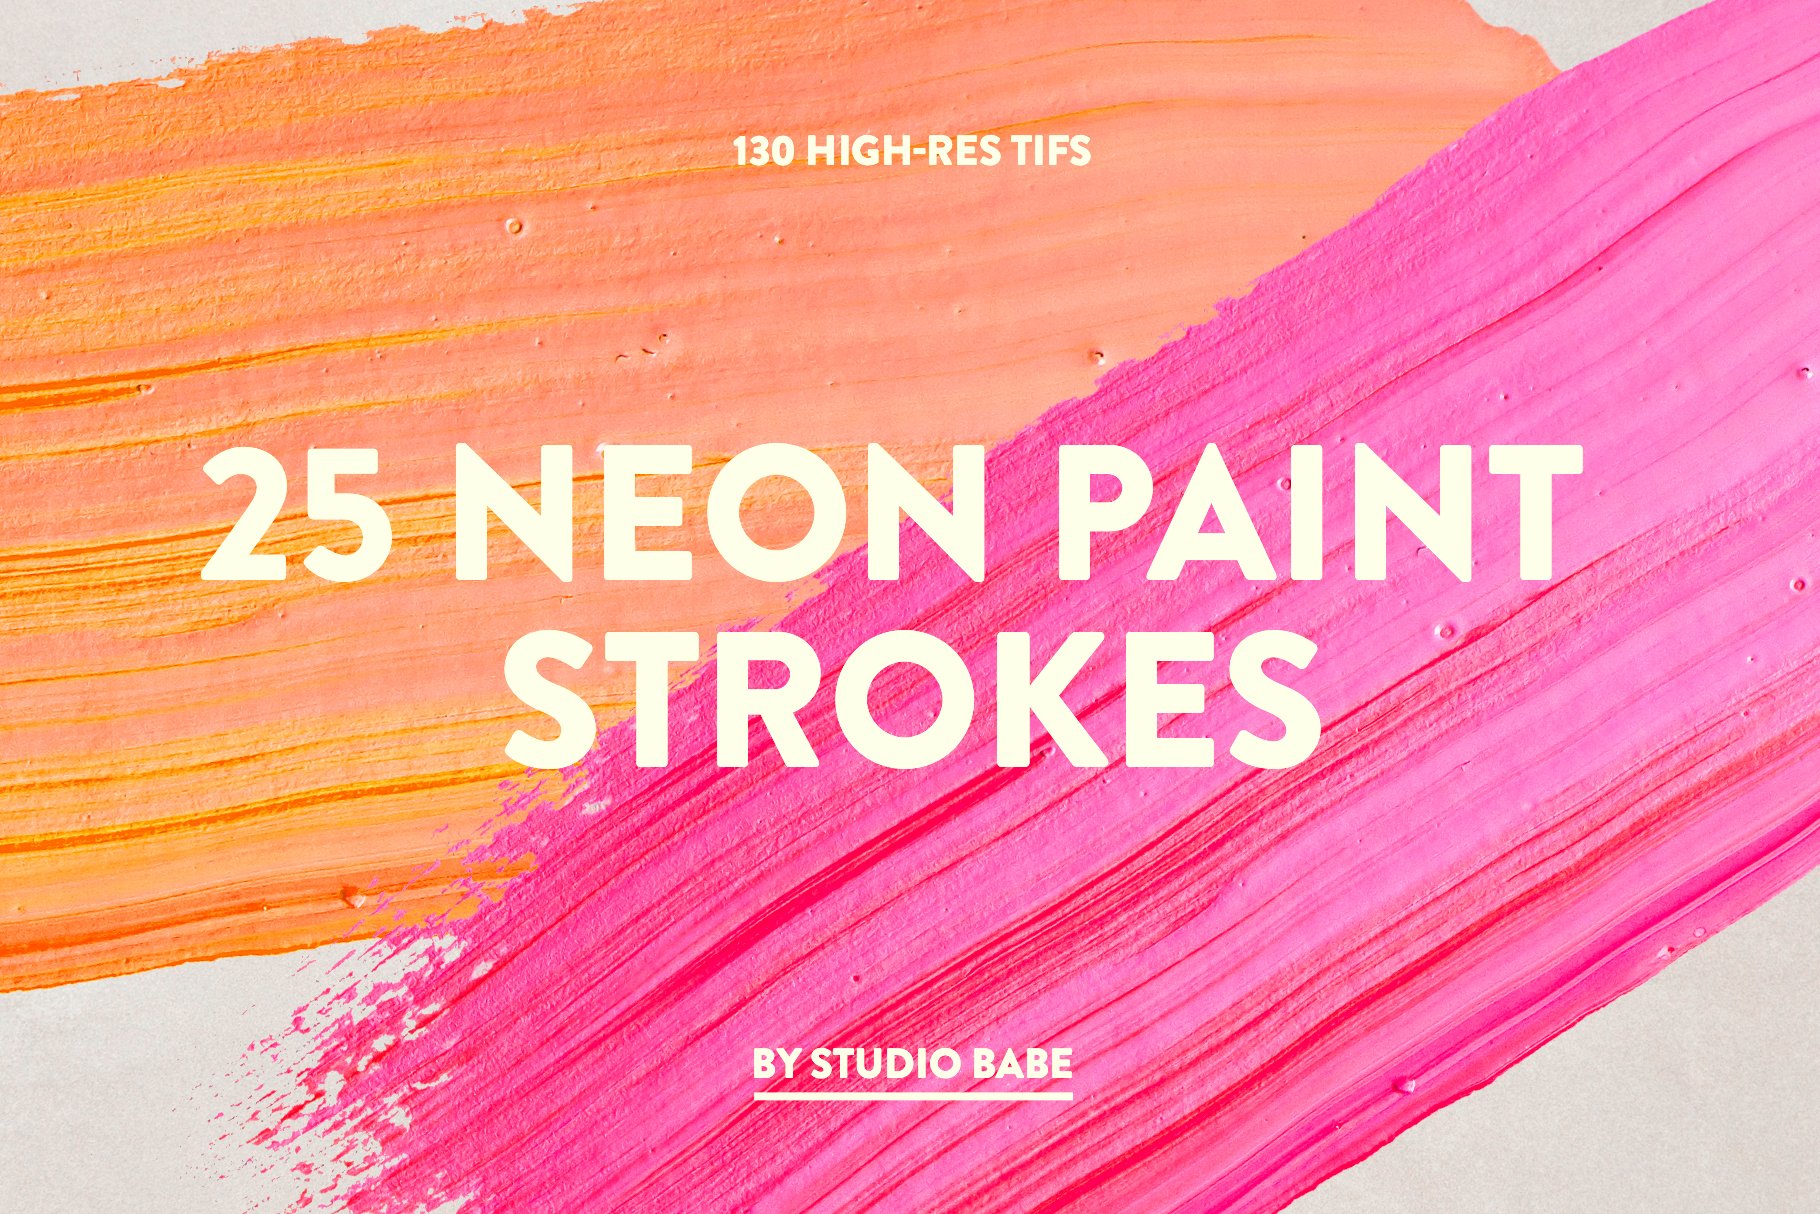 25 Neon Paint Strokes cover image.